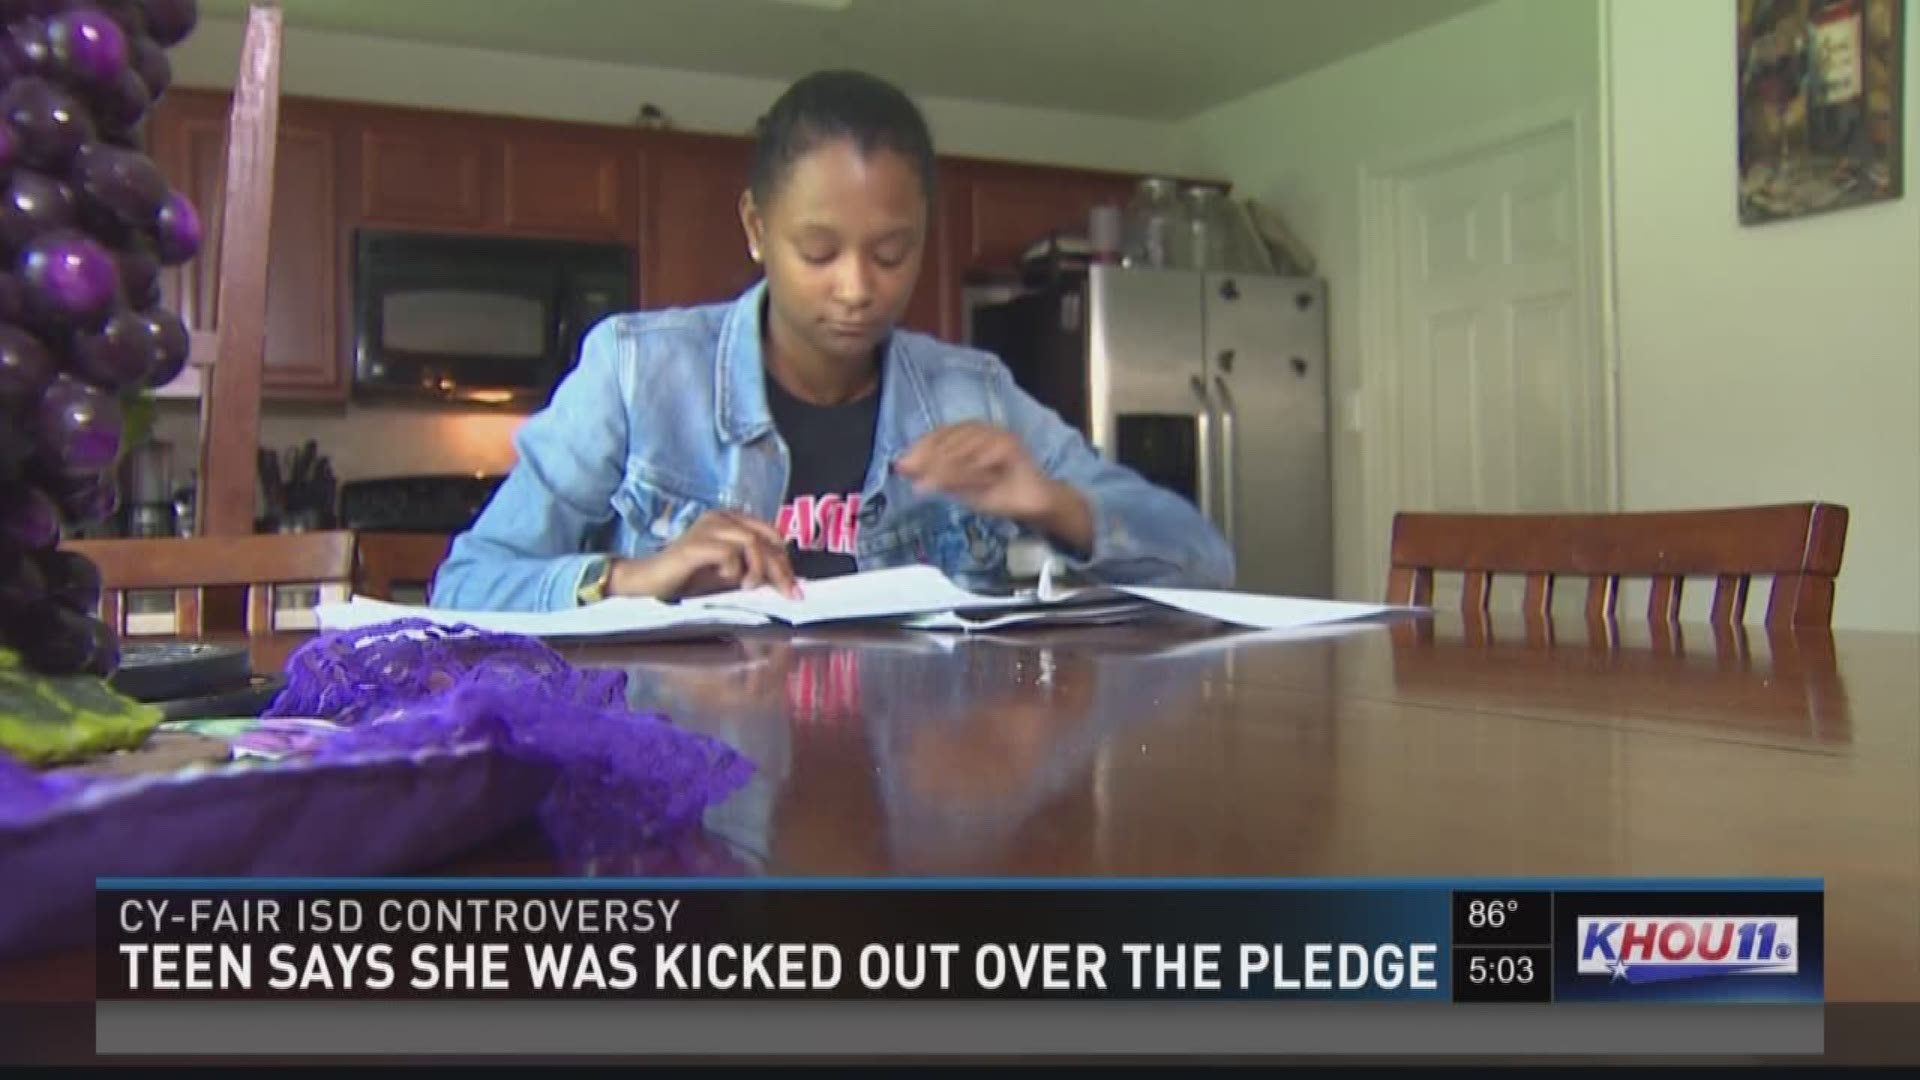 A Cy Fair ISD senior is no longer sure when she?ll be able to graduate after she says she was kicked out of school on Monday for not standing for the Pledge of Allegiance. On Thursday, she still wasn't allowed to go back.